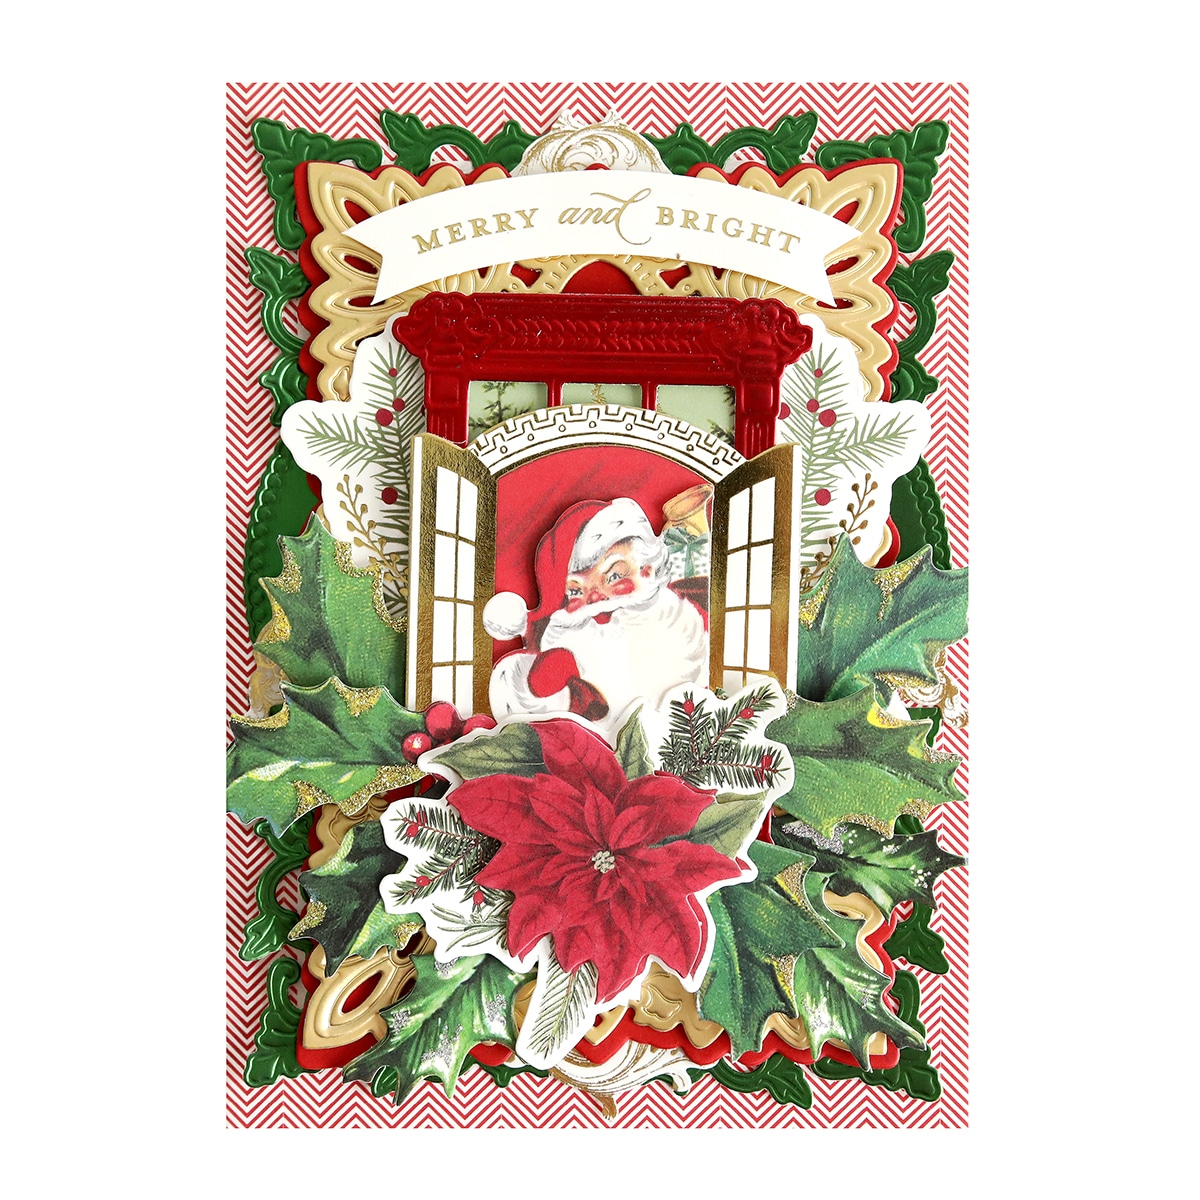 A christmas card with santa claus and holly.